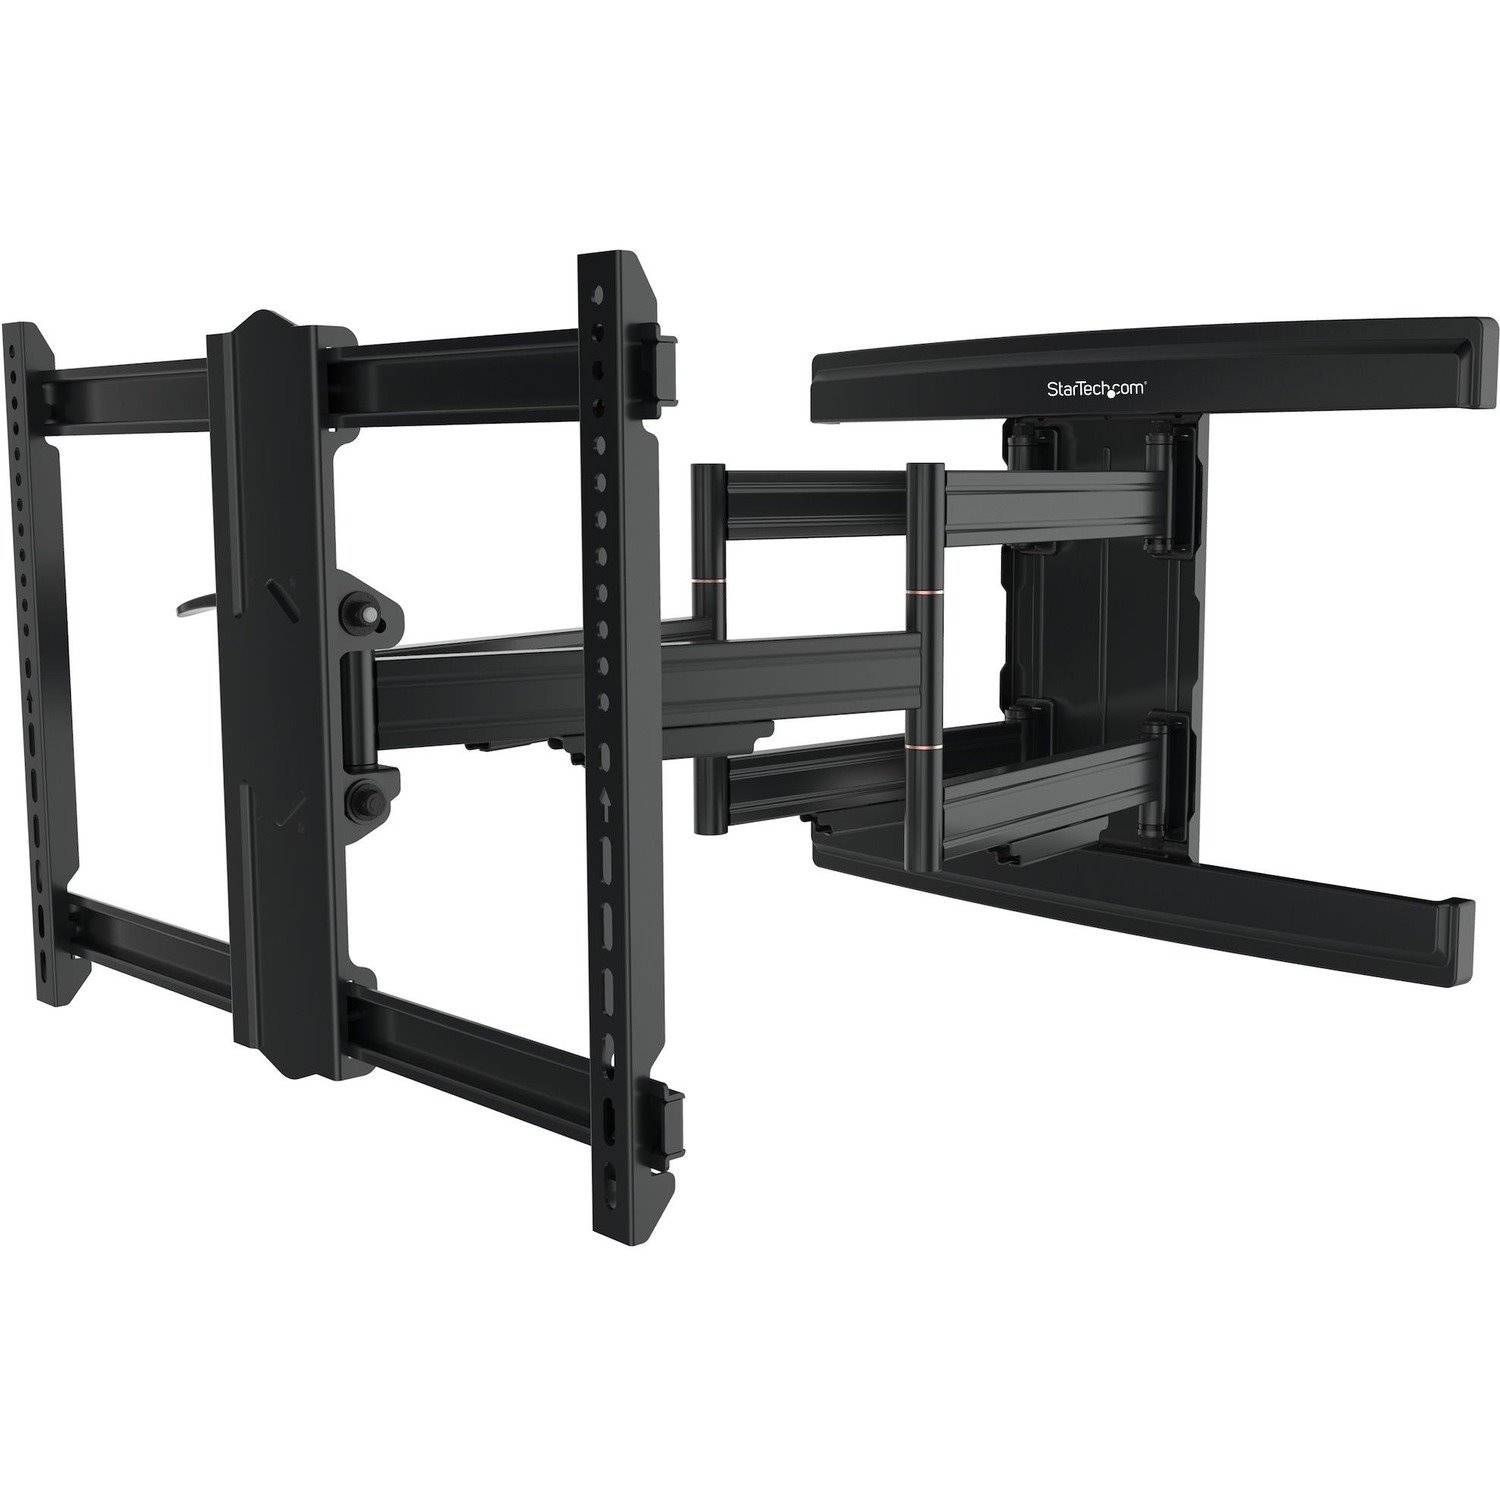 StarTech.com Wall Mount for TV, Flat Panel Display, Curved Screen Display, Digital Signage Display